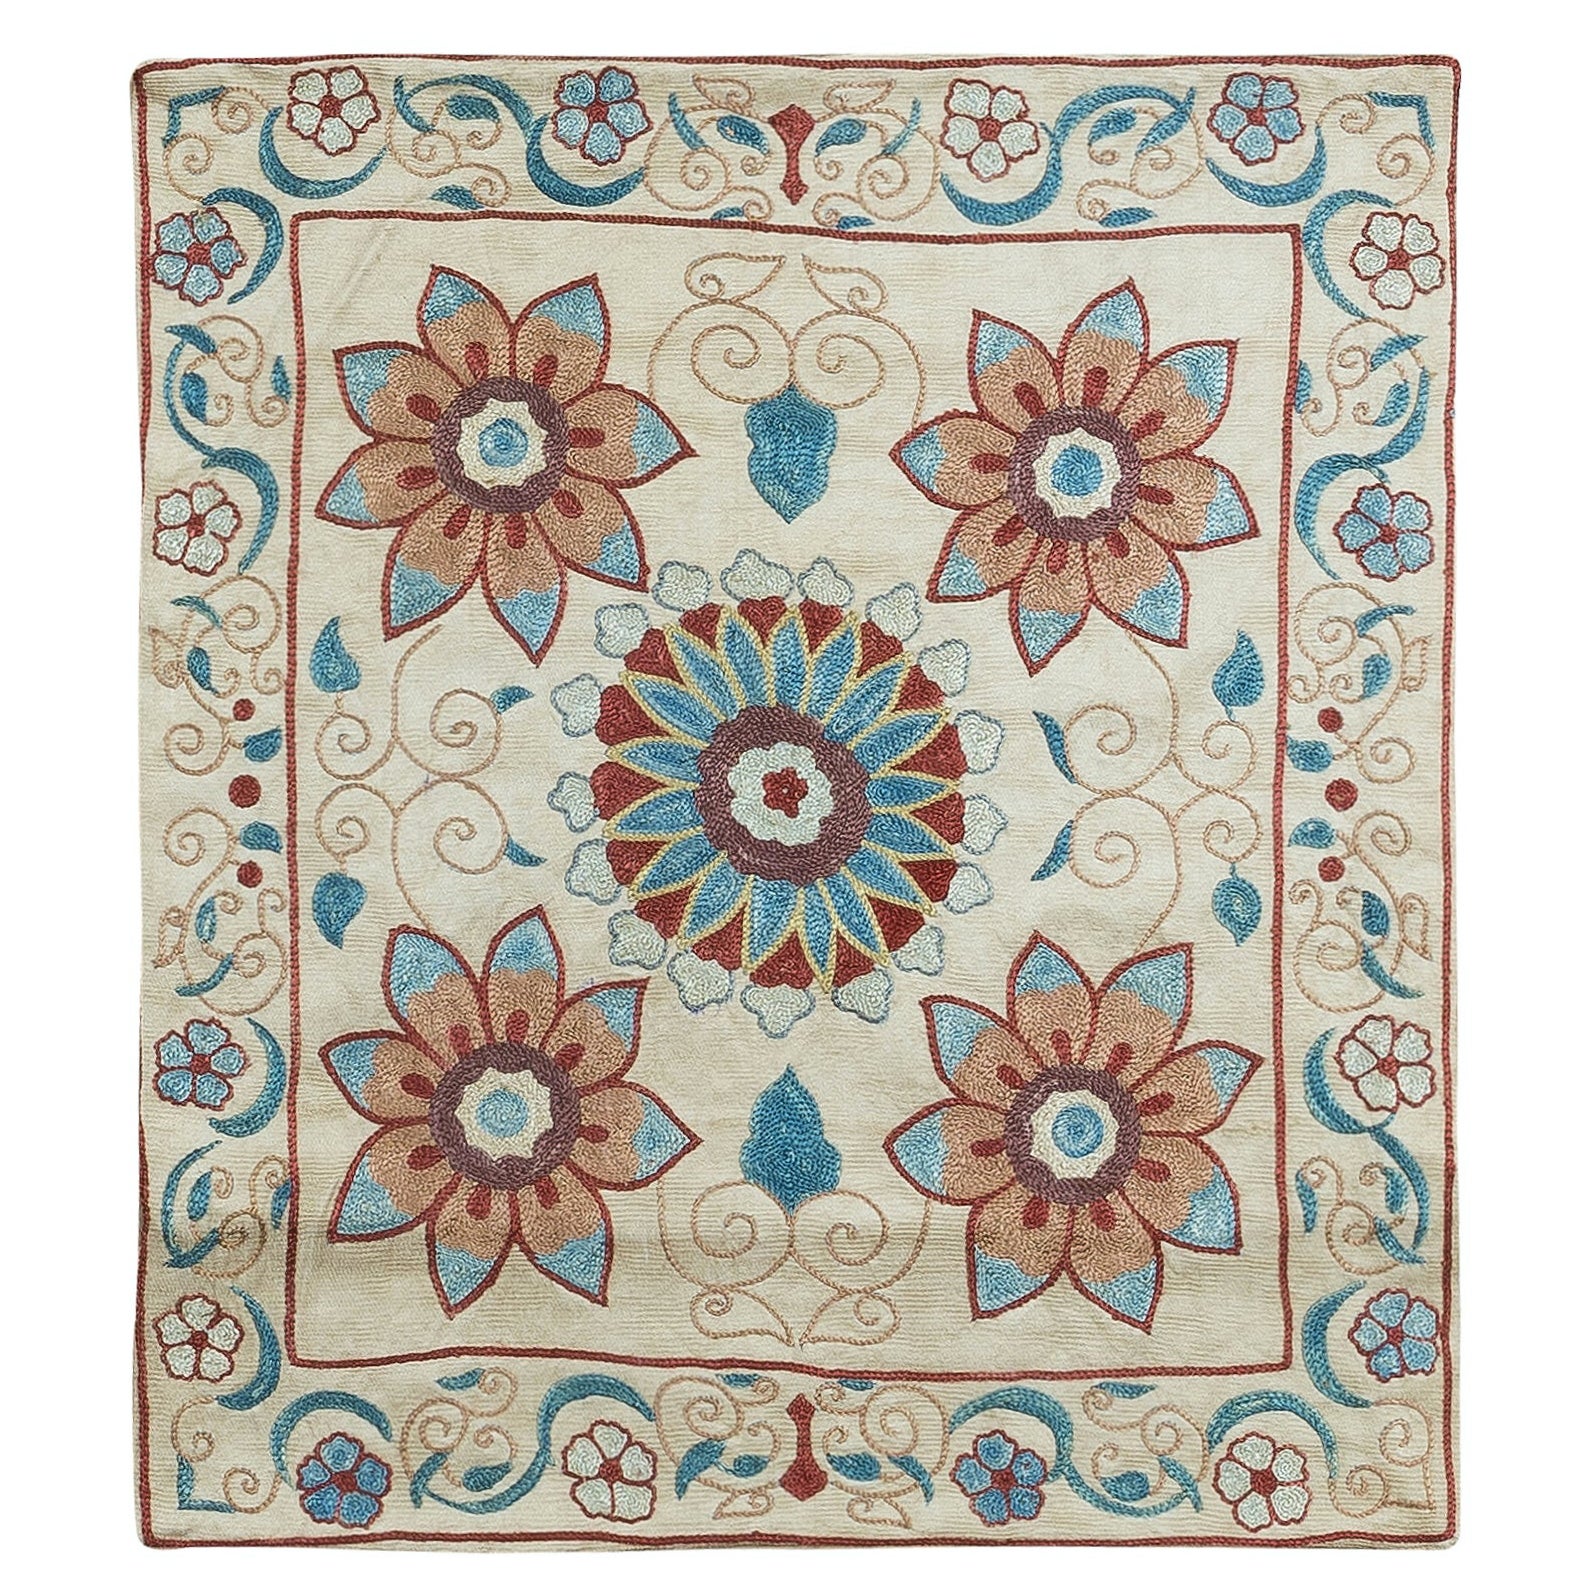 100% Silk Floral Embroidered Suzani Cushion Cover in Teal, Red and Cream